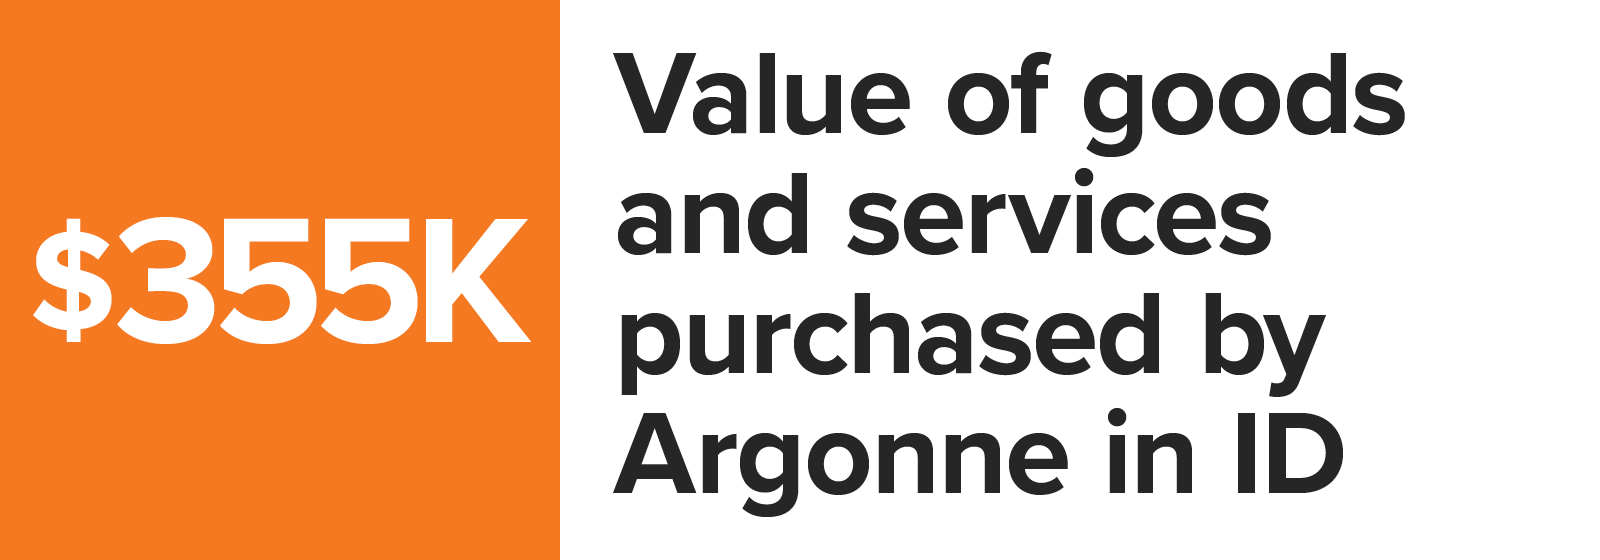 Number graphic value of goods and services purchased by Argonne in Idaho